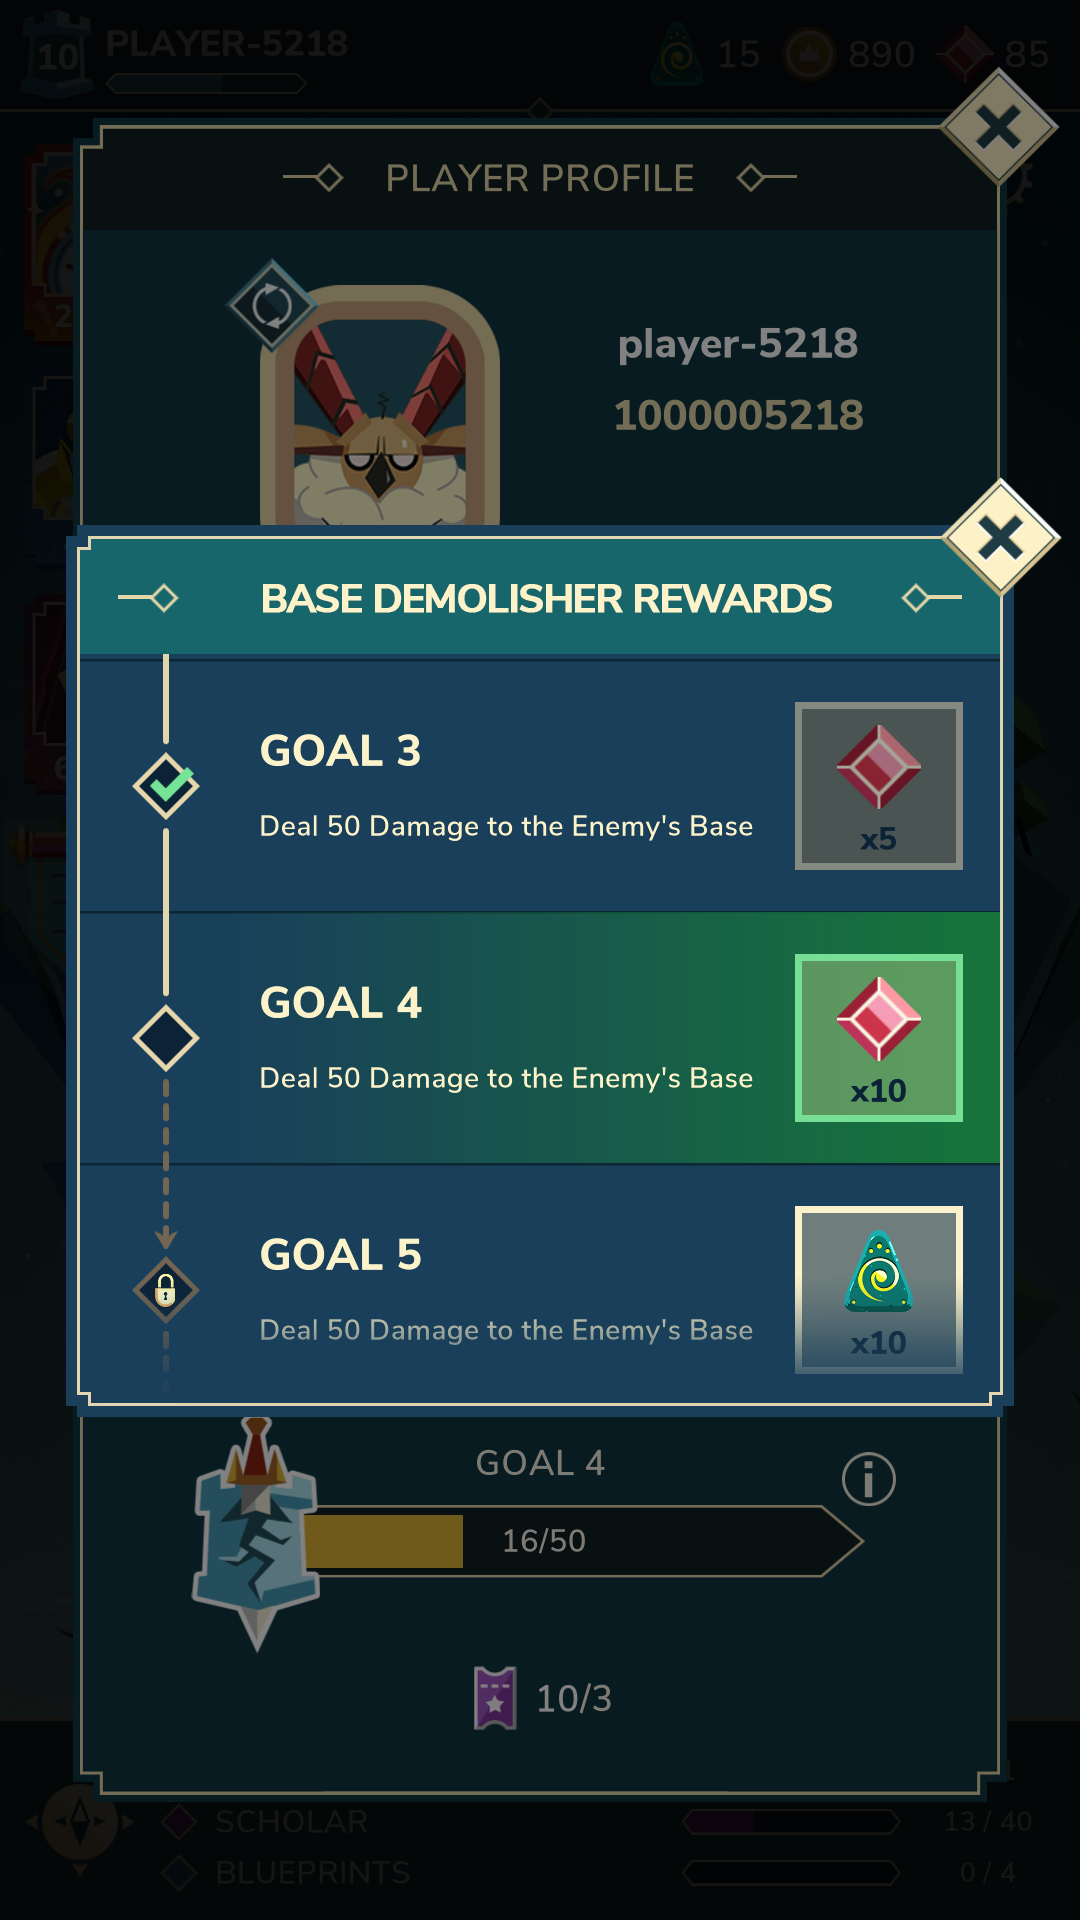 Popup displaying the current milestones ladder for the resource bonuses